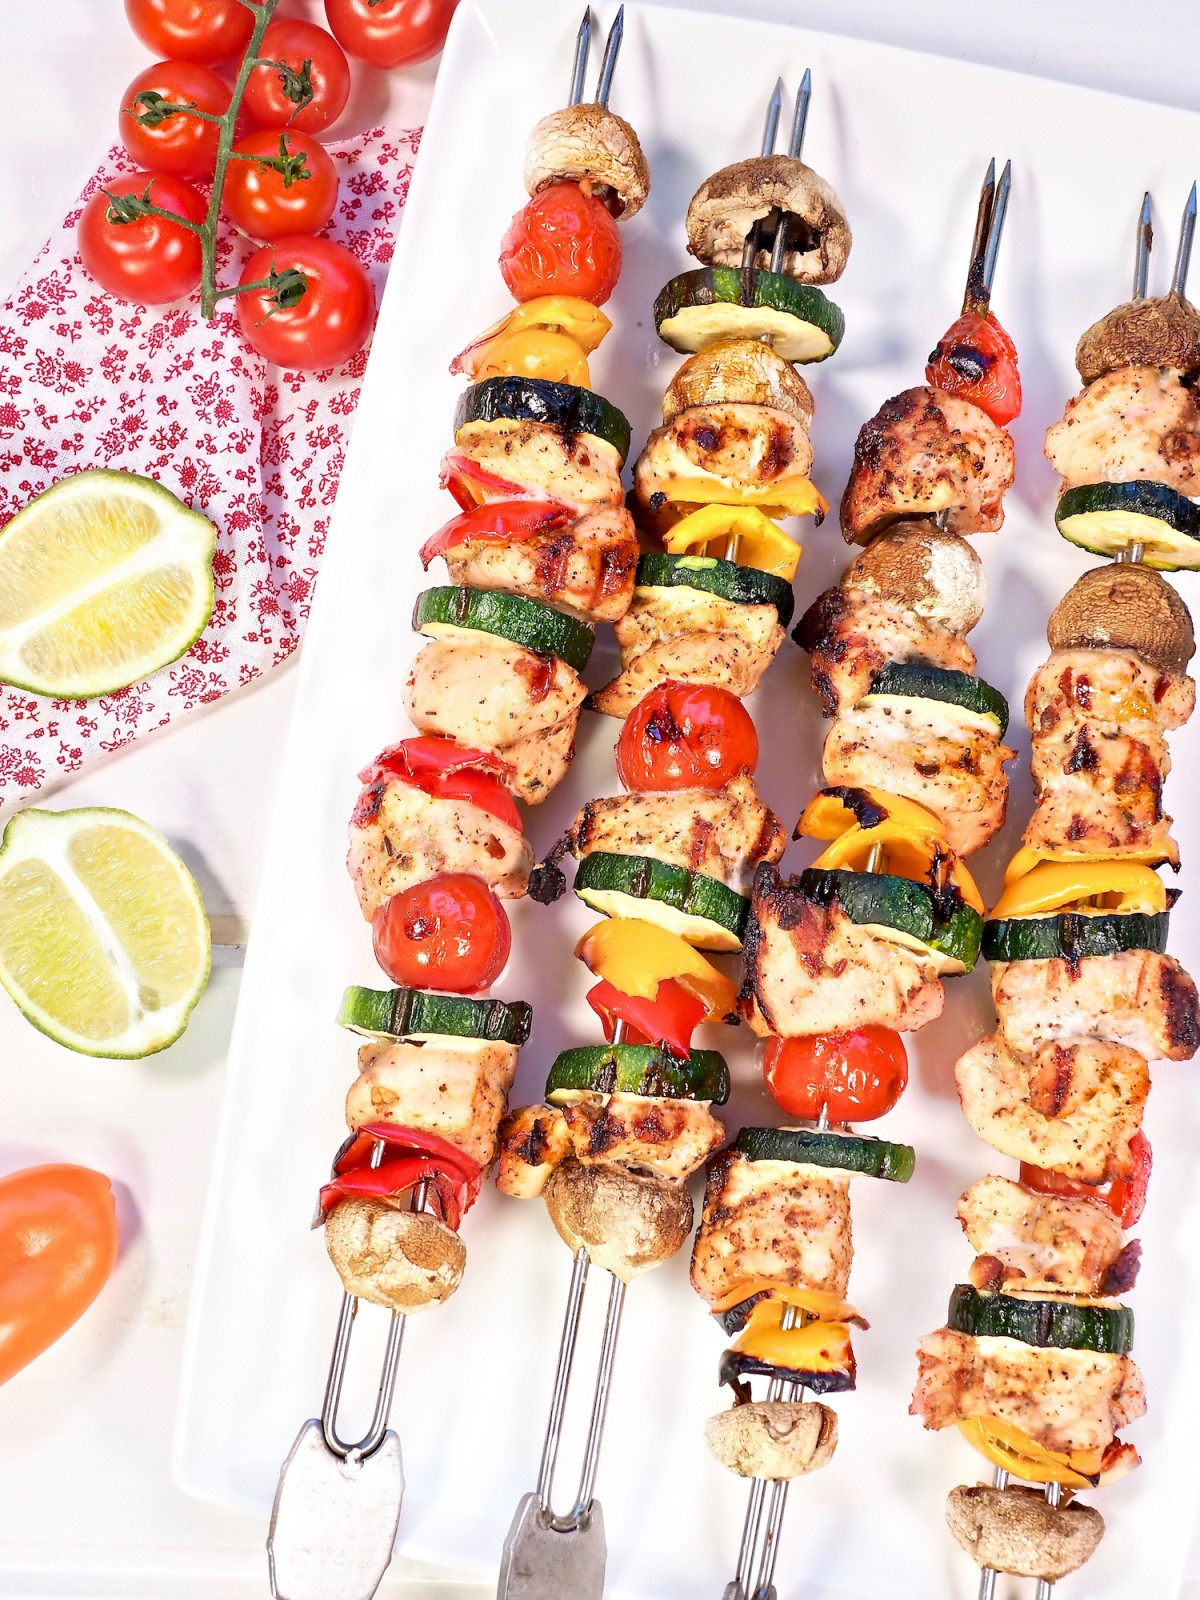 Grilled Chili Lime Chicken Skewers